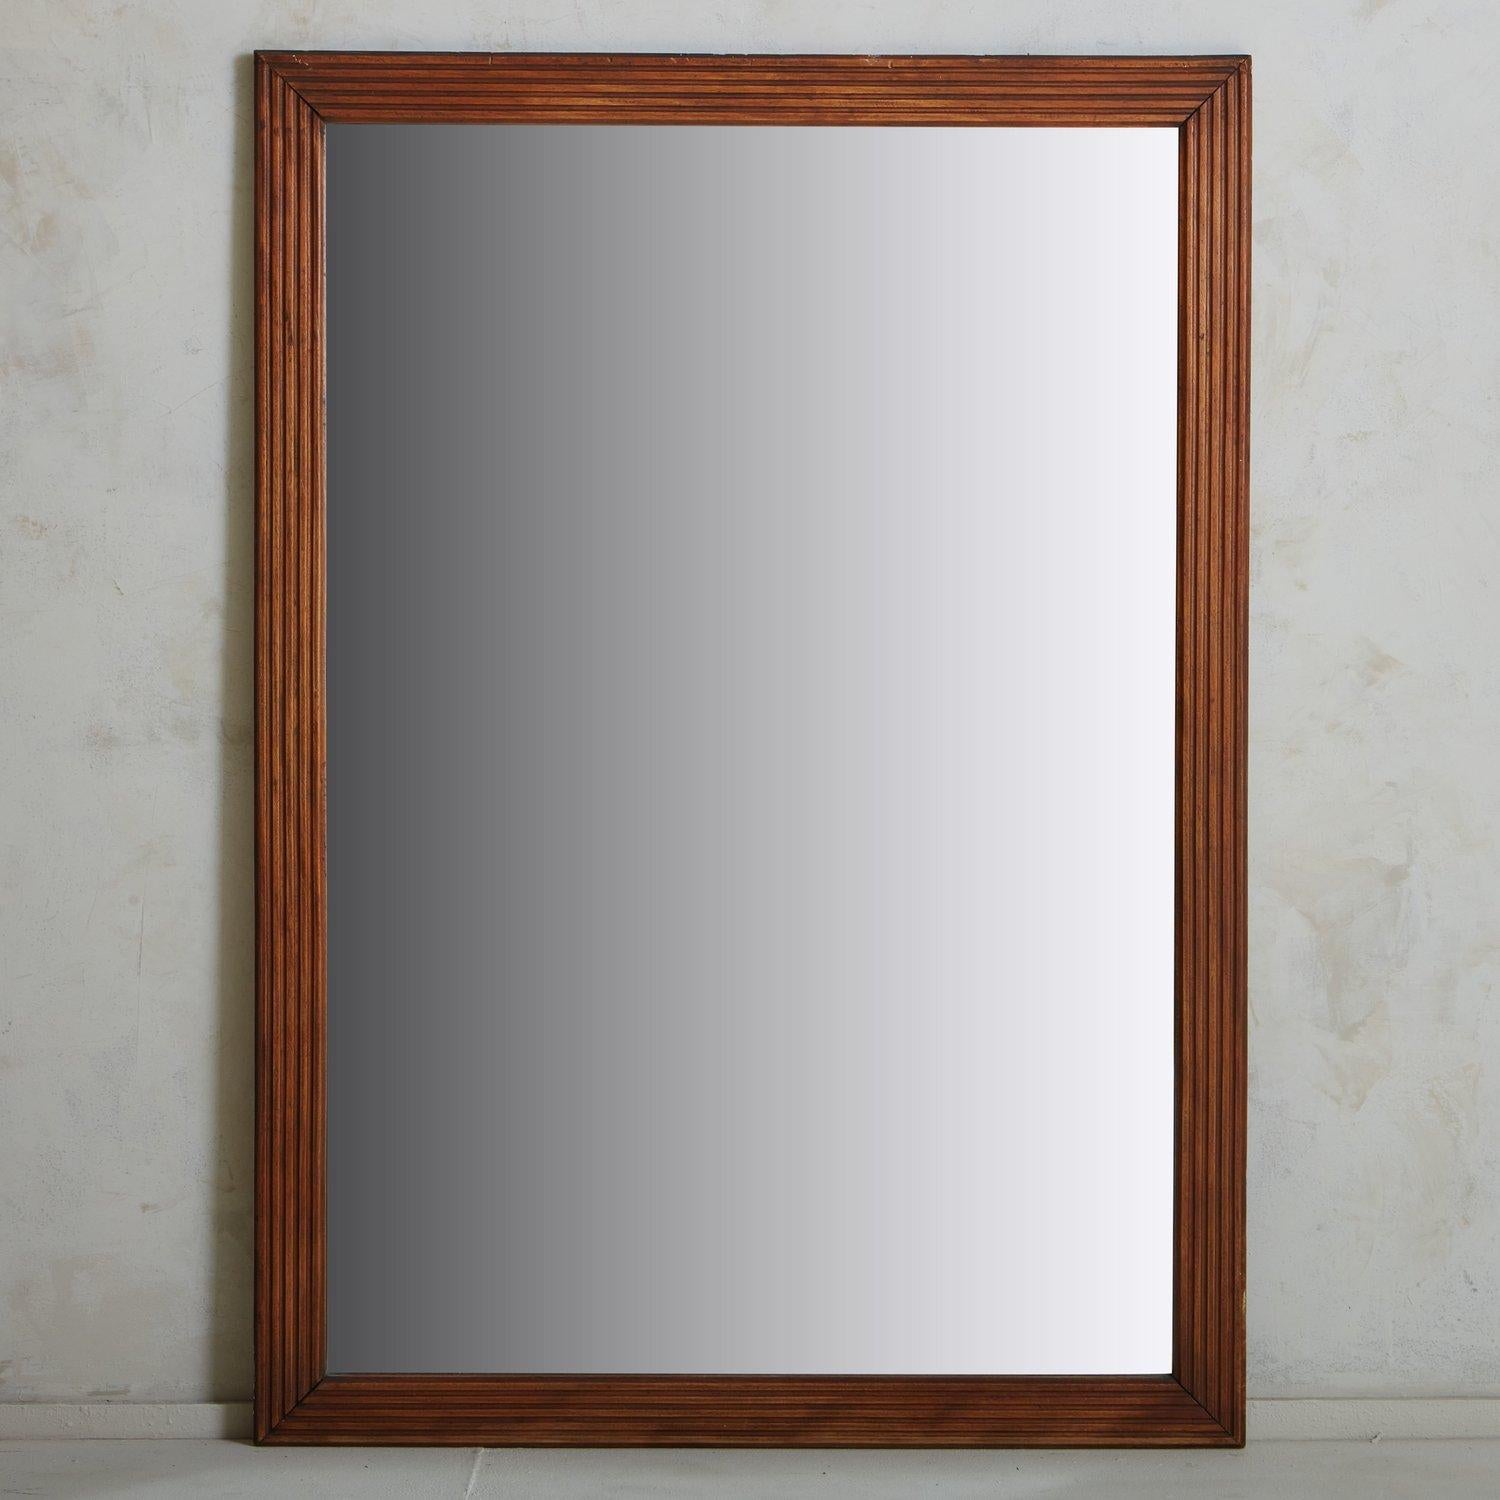 A monumental rectangular French mirror featuring a textured oak frame with beautiful line detailing. This stately mirror has a beautiful patina to the wood frame and time honored wear. It has a wooden backing constructed with six planks. Sourced in